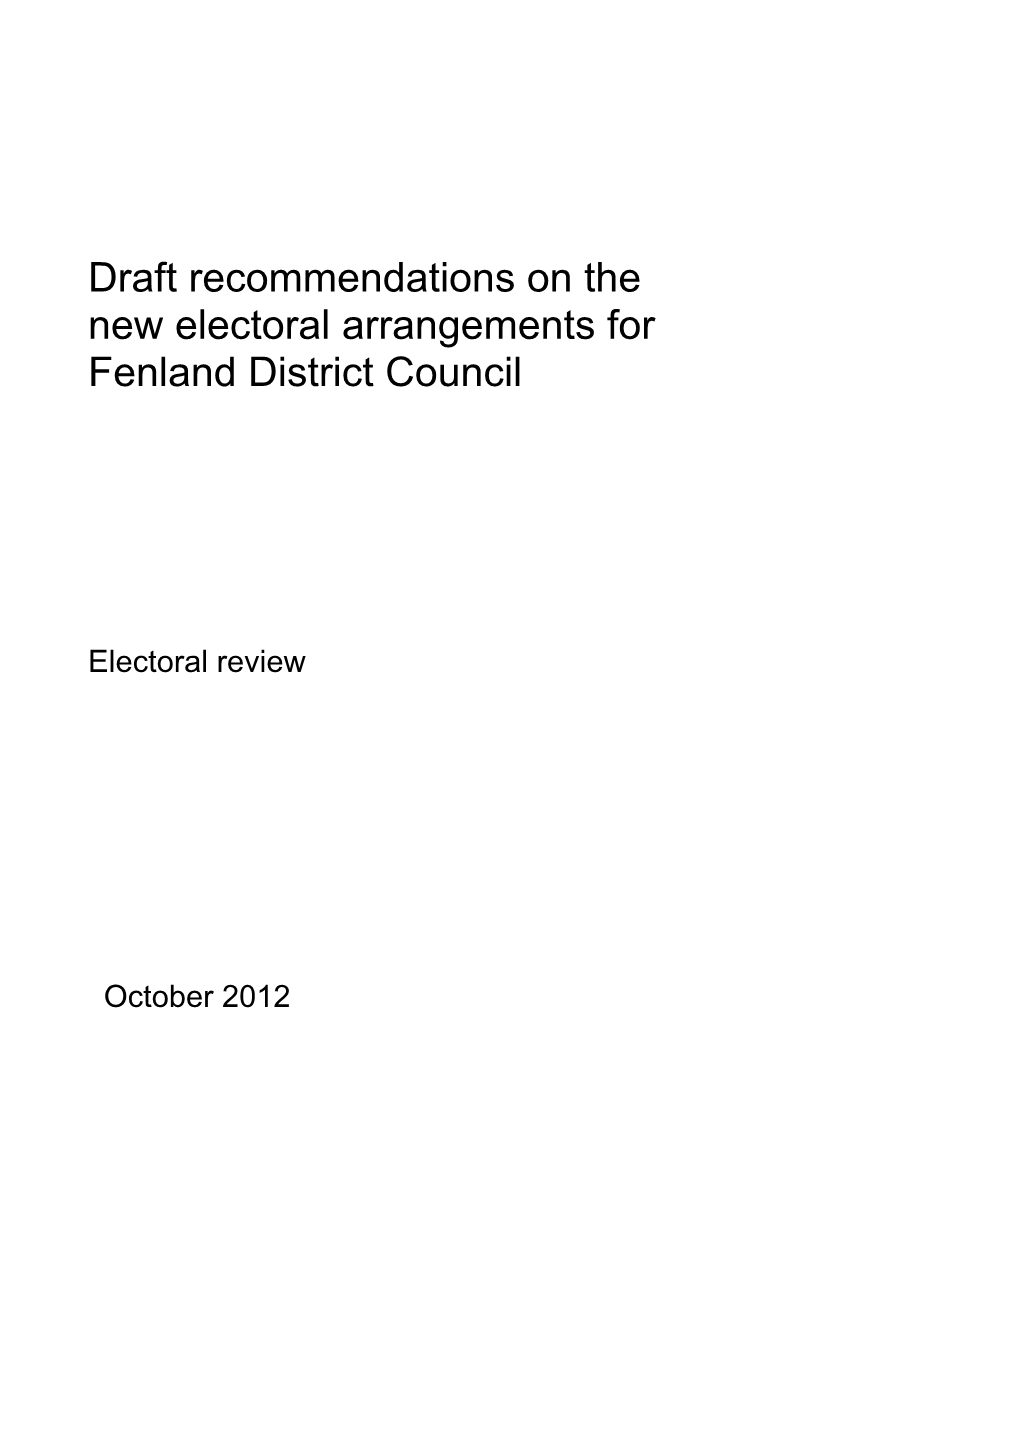 Draft Recommendations Report for Fenland District Council